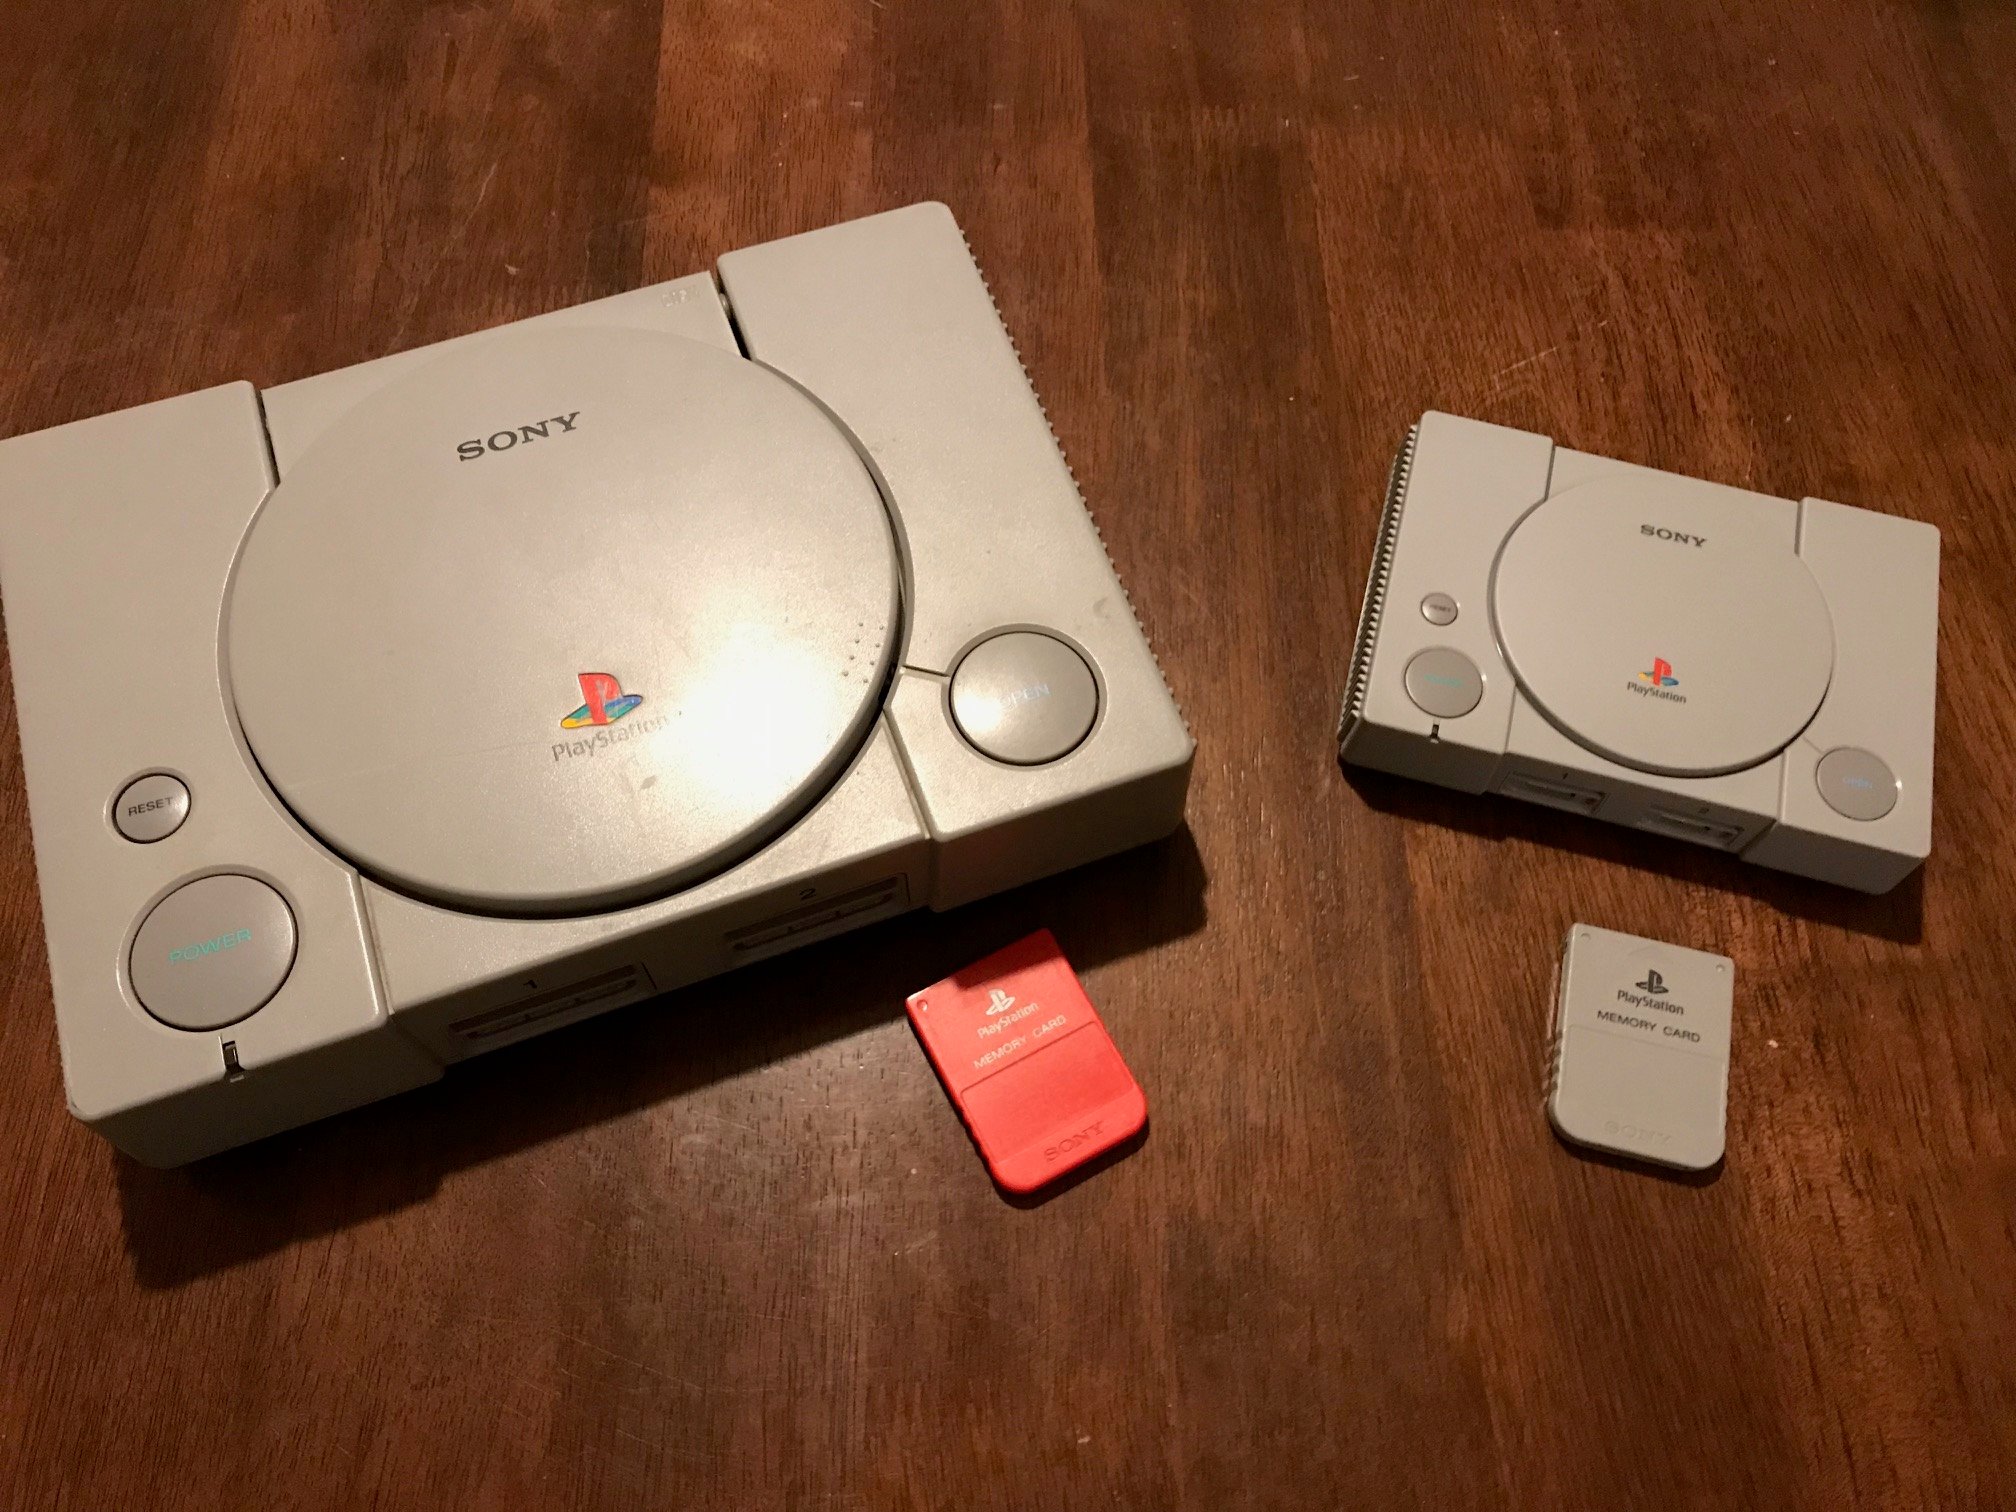 PlayStation Classic (PSX, PS1) ripped and highly compressed games